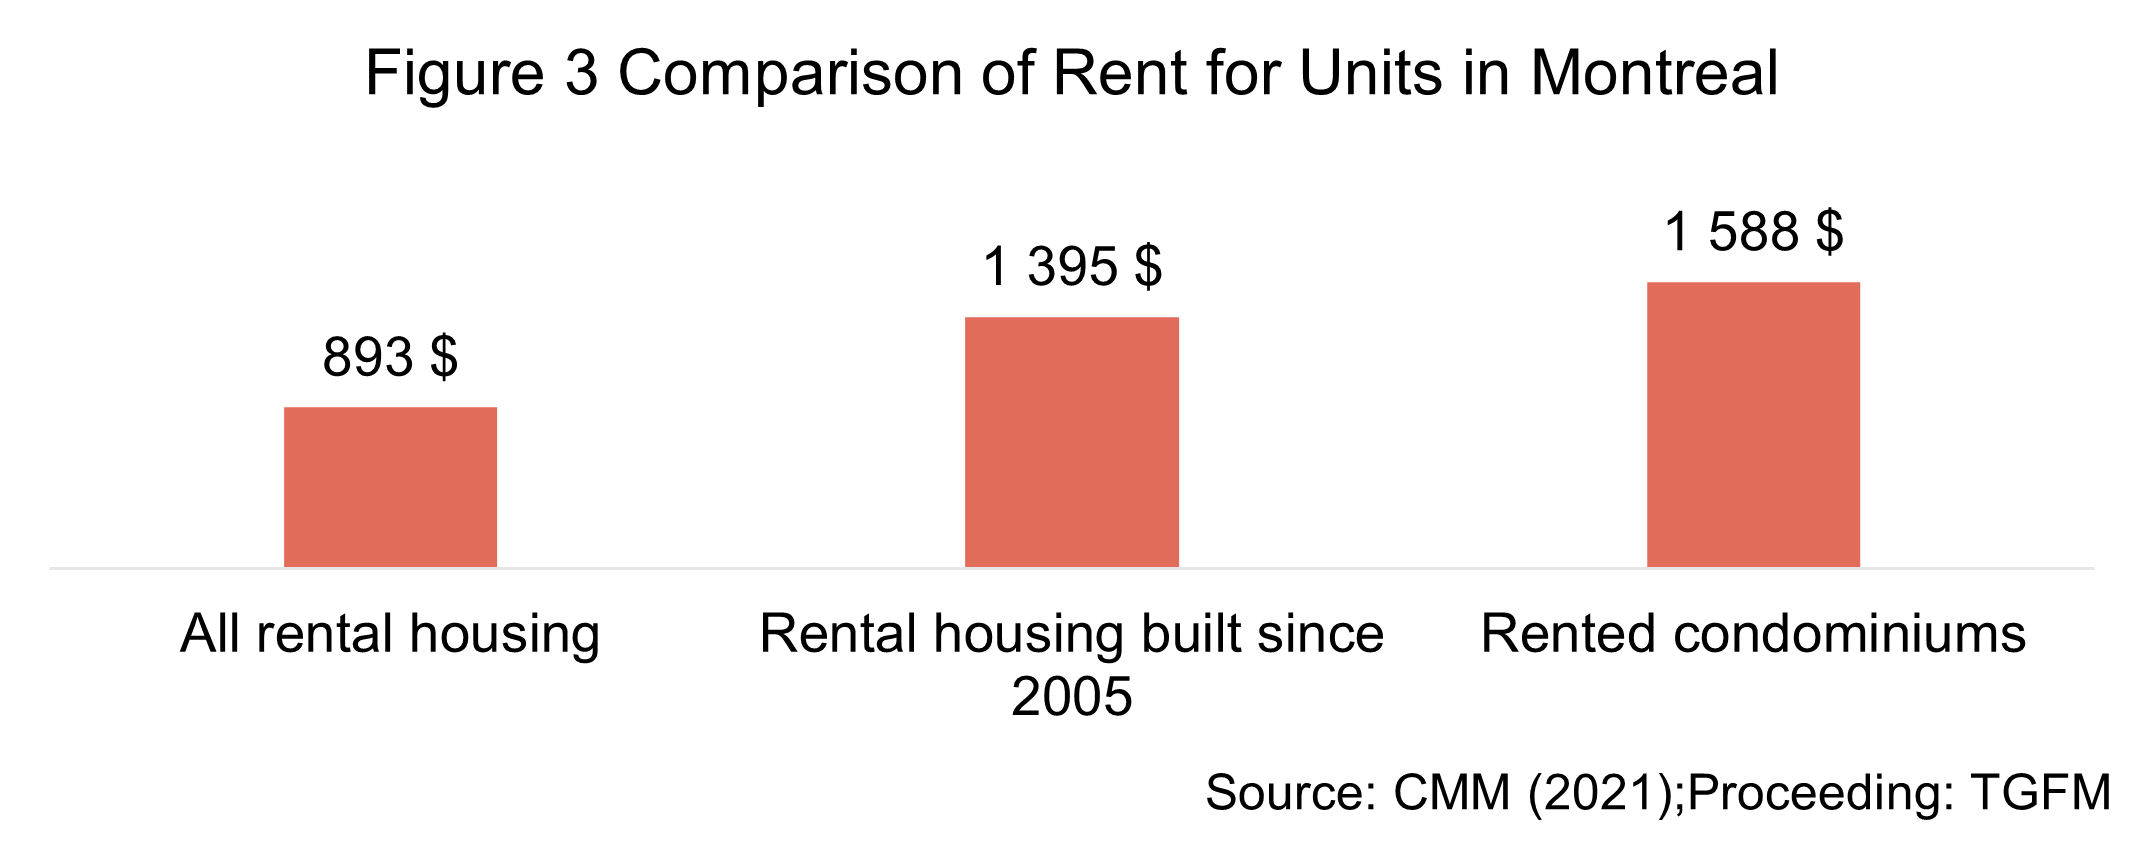 The figure shows the average cost of rental units. The overall average is $893, those built since 2005 are $1,395 and rental condominiums are $1,588.